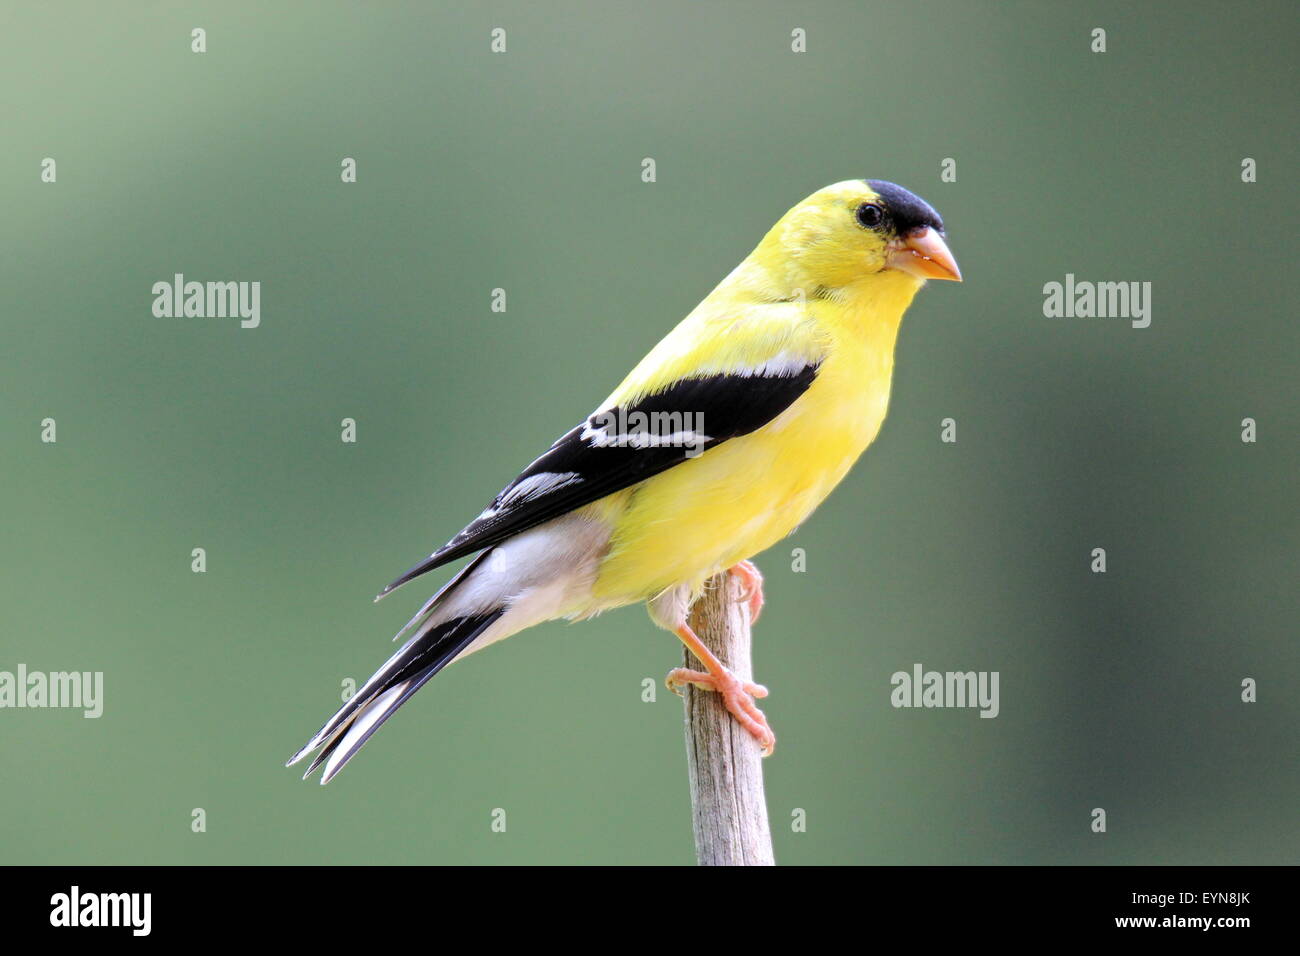 A male American Goldfinch (Carduelis tristis) in bright yellow summer breeding plumage, perching on a branch. Stock Photo